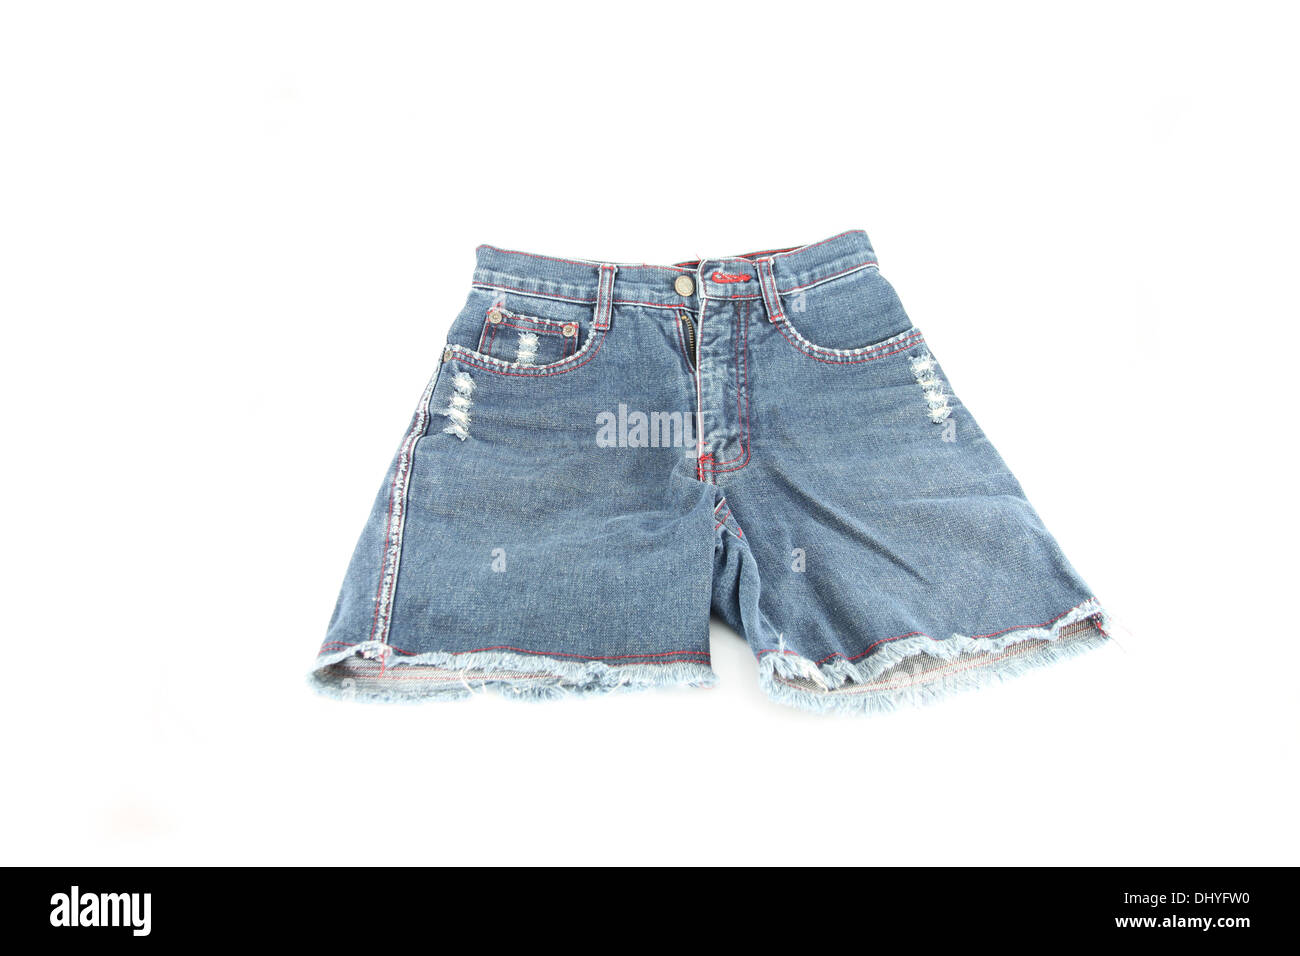 closeup the Jeans shorts on white background. Stock Photo